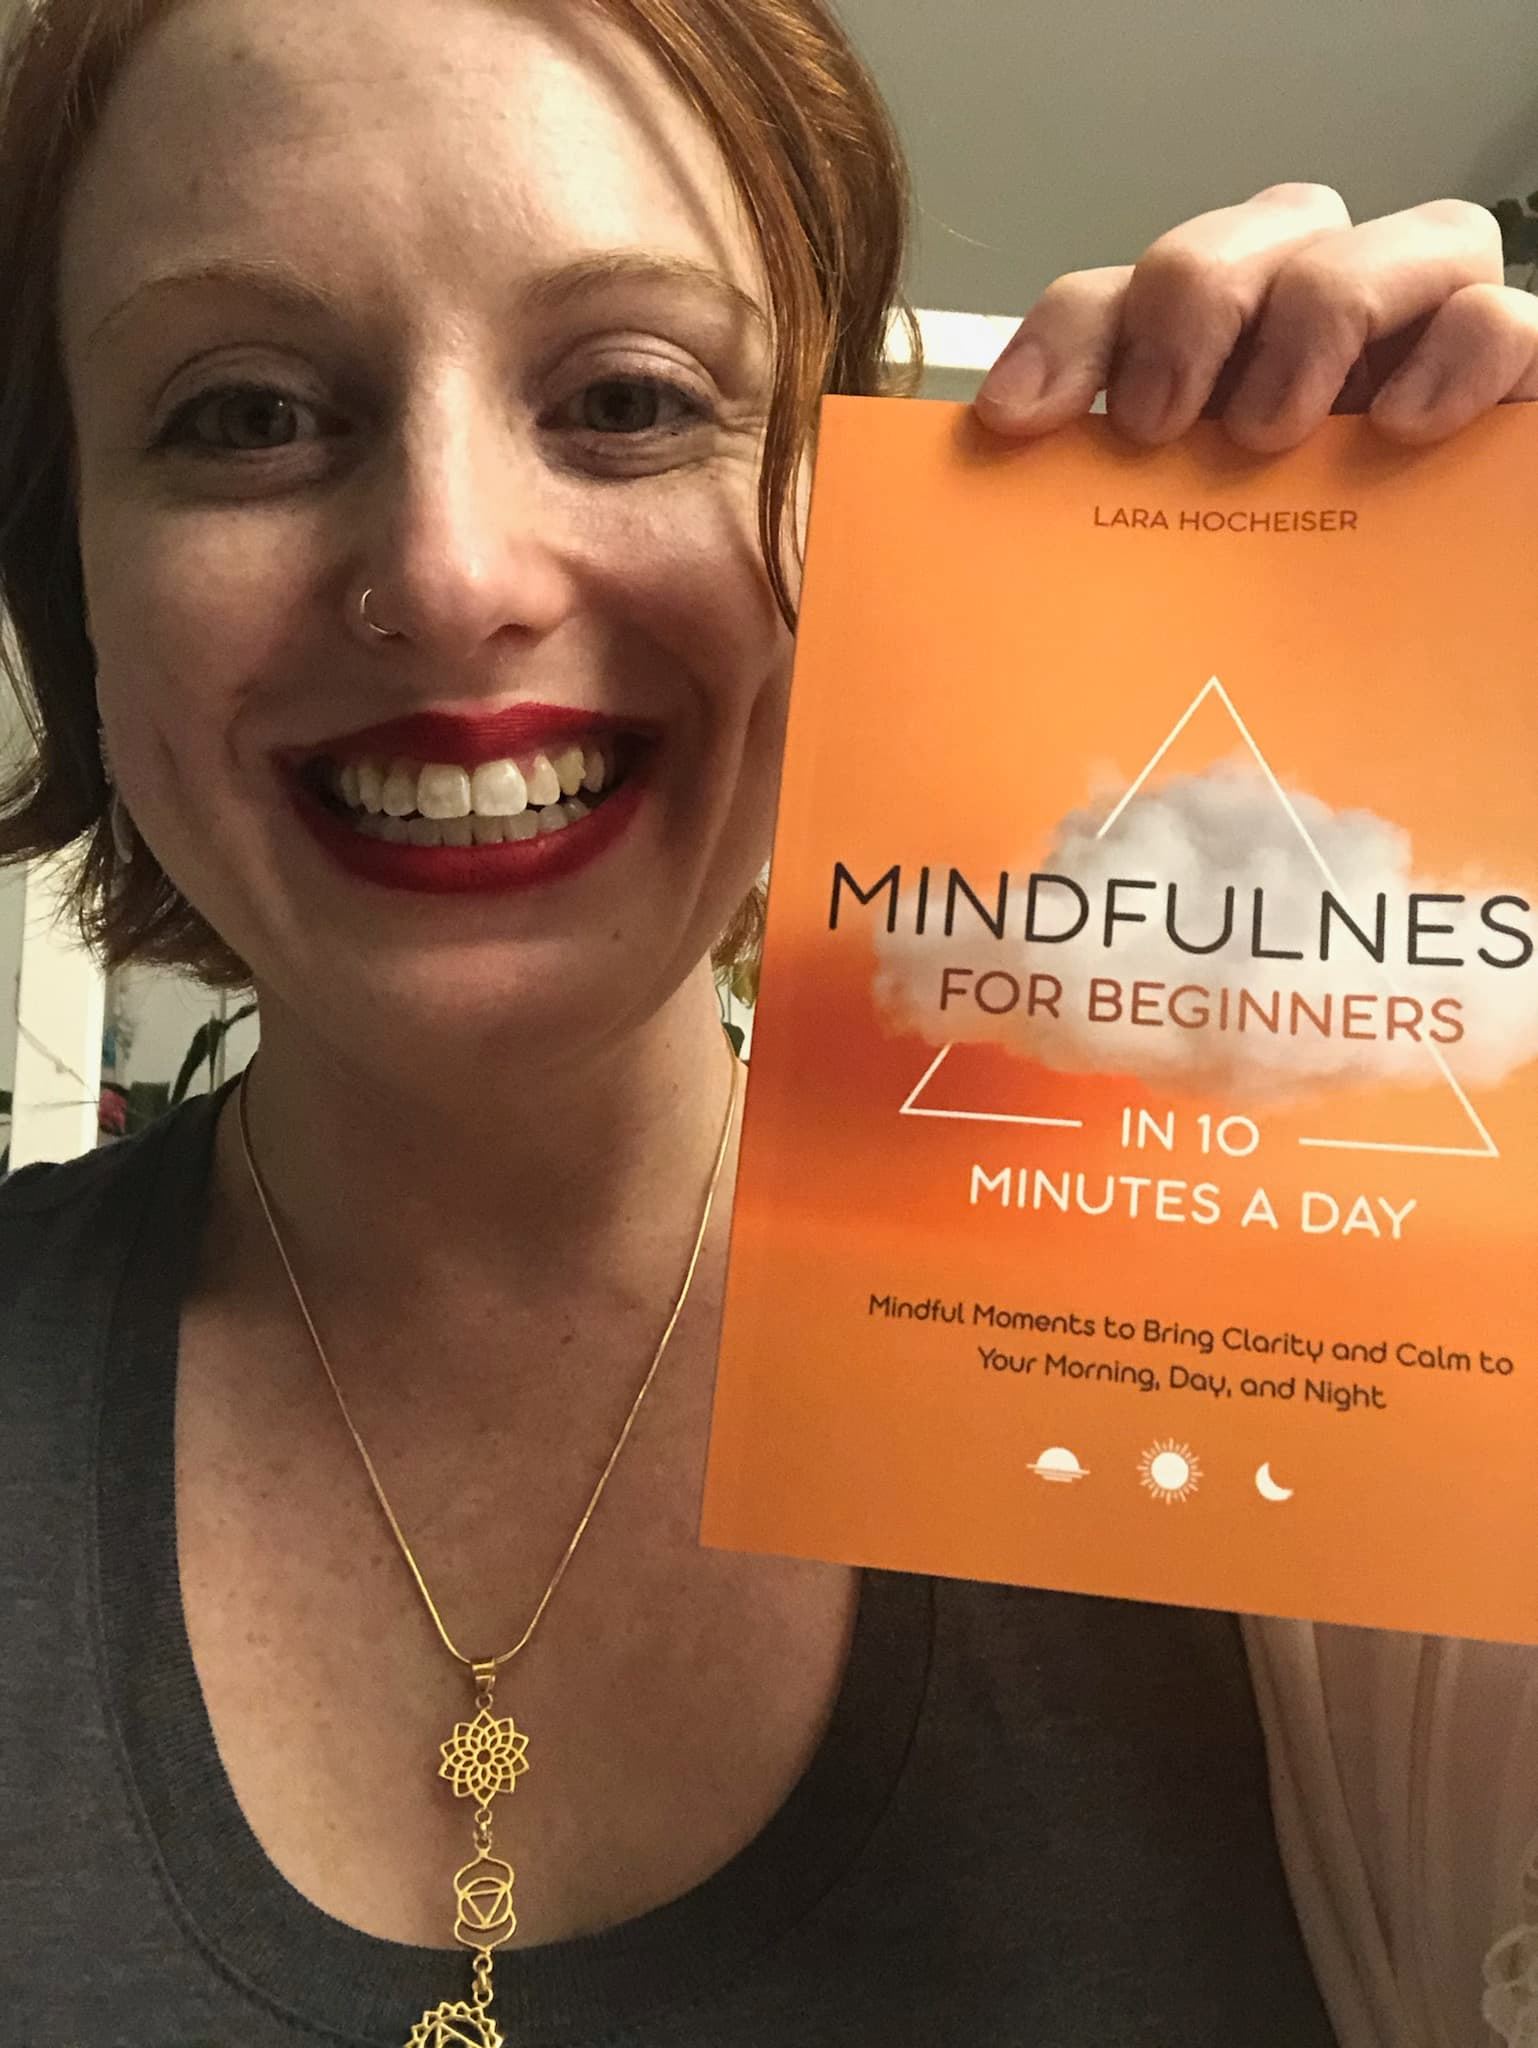 What readers are saying about "Mindfulness for Beginners in 10 Minutes a Day"